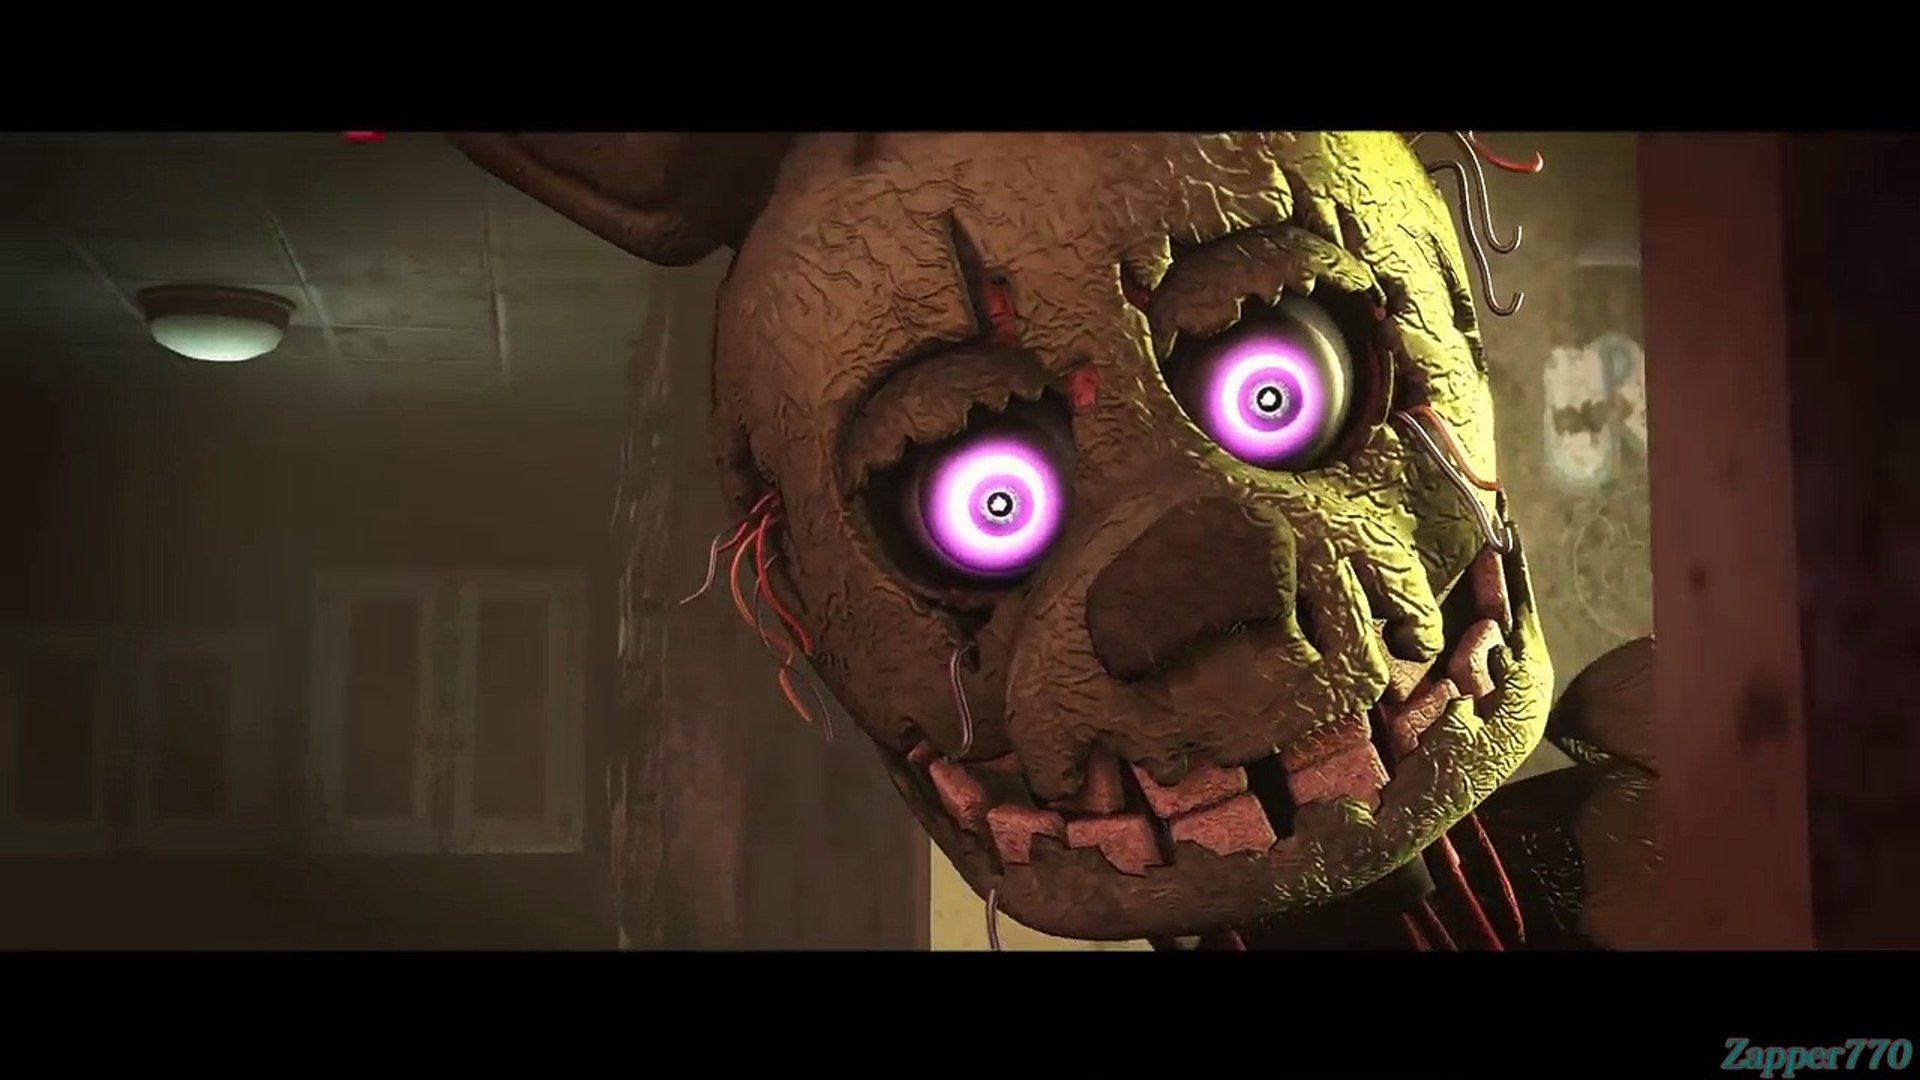 Five Nights at Freddys Voice Compilation: Freddy, Bonnie